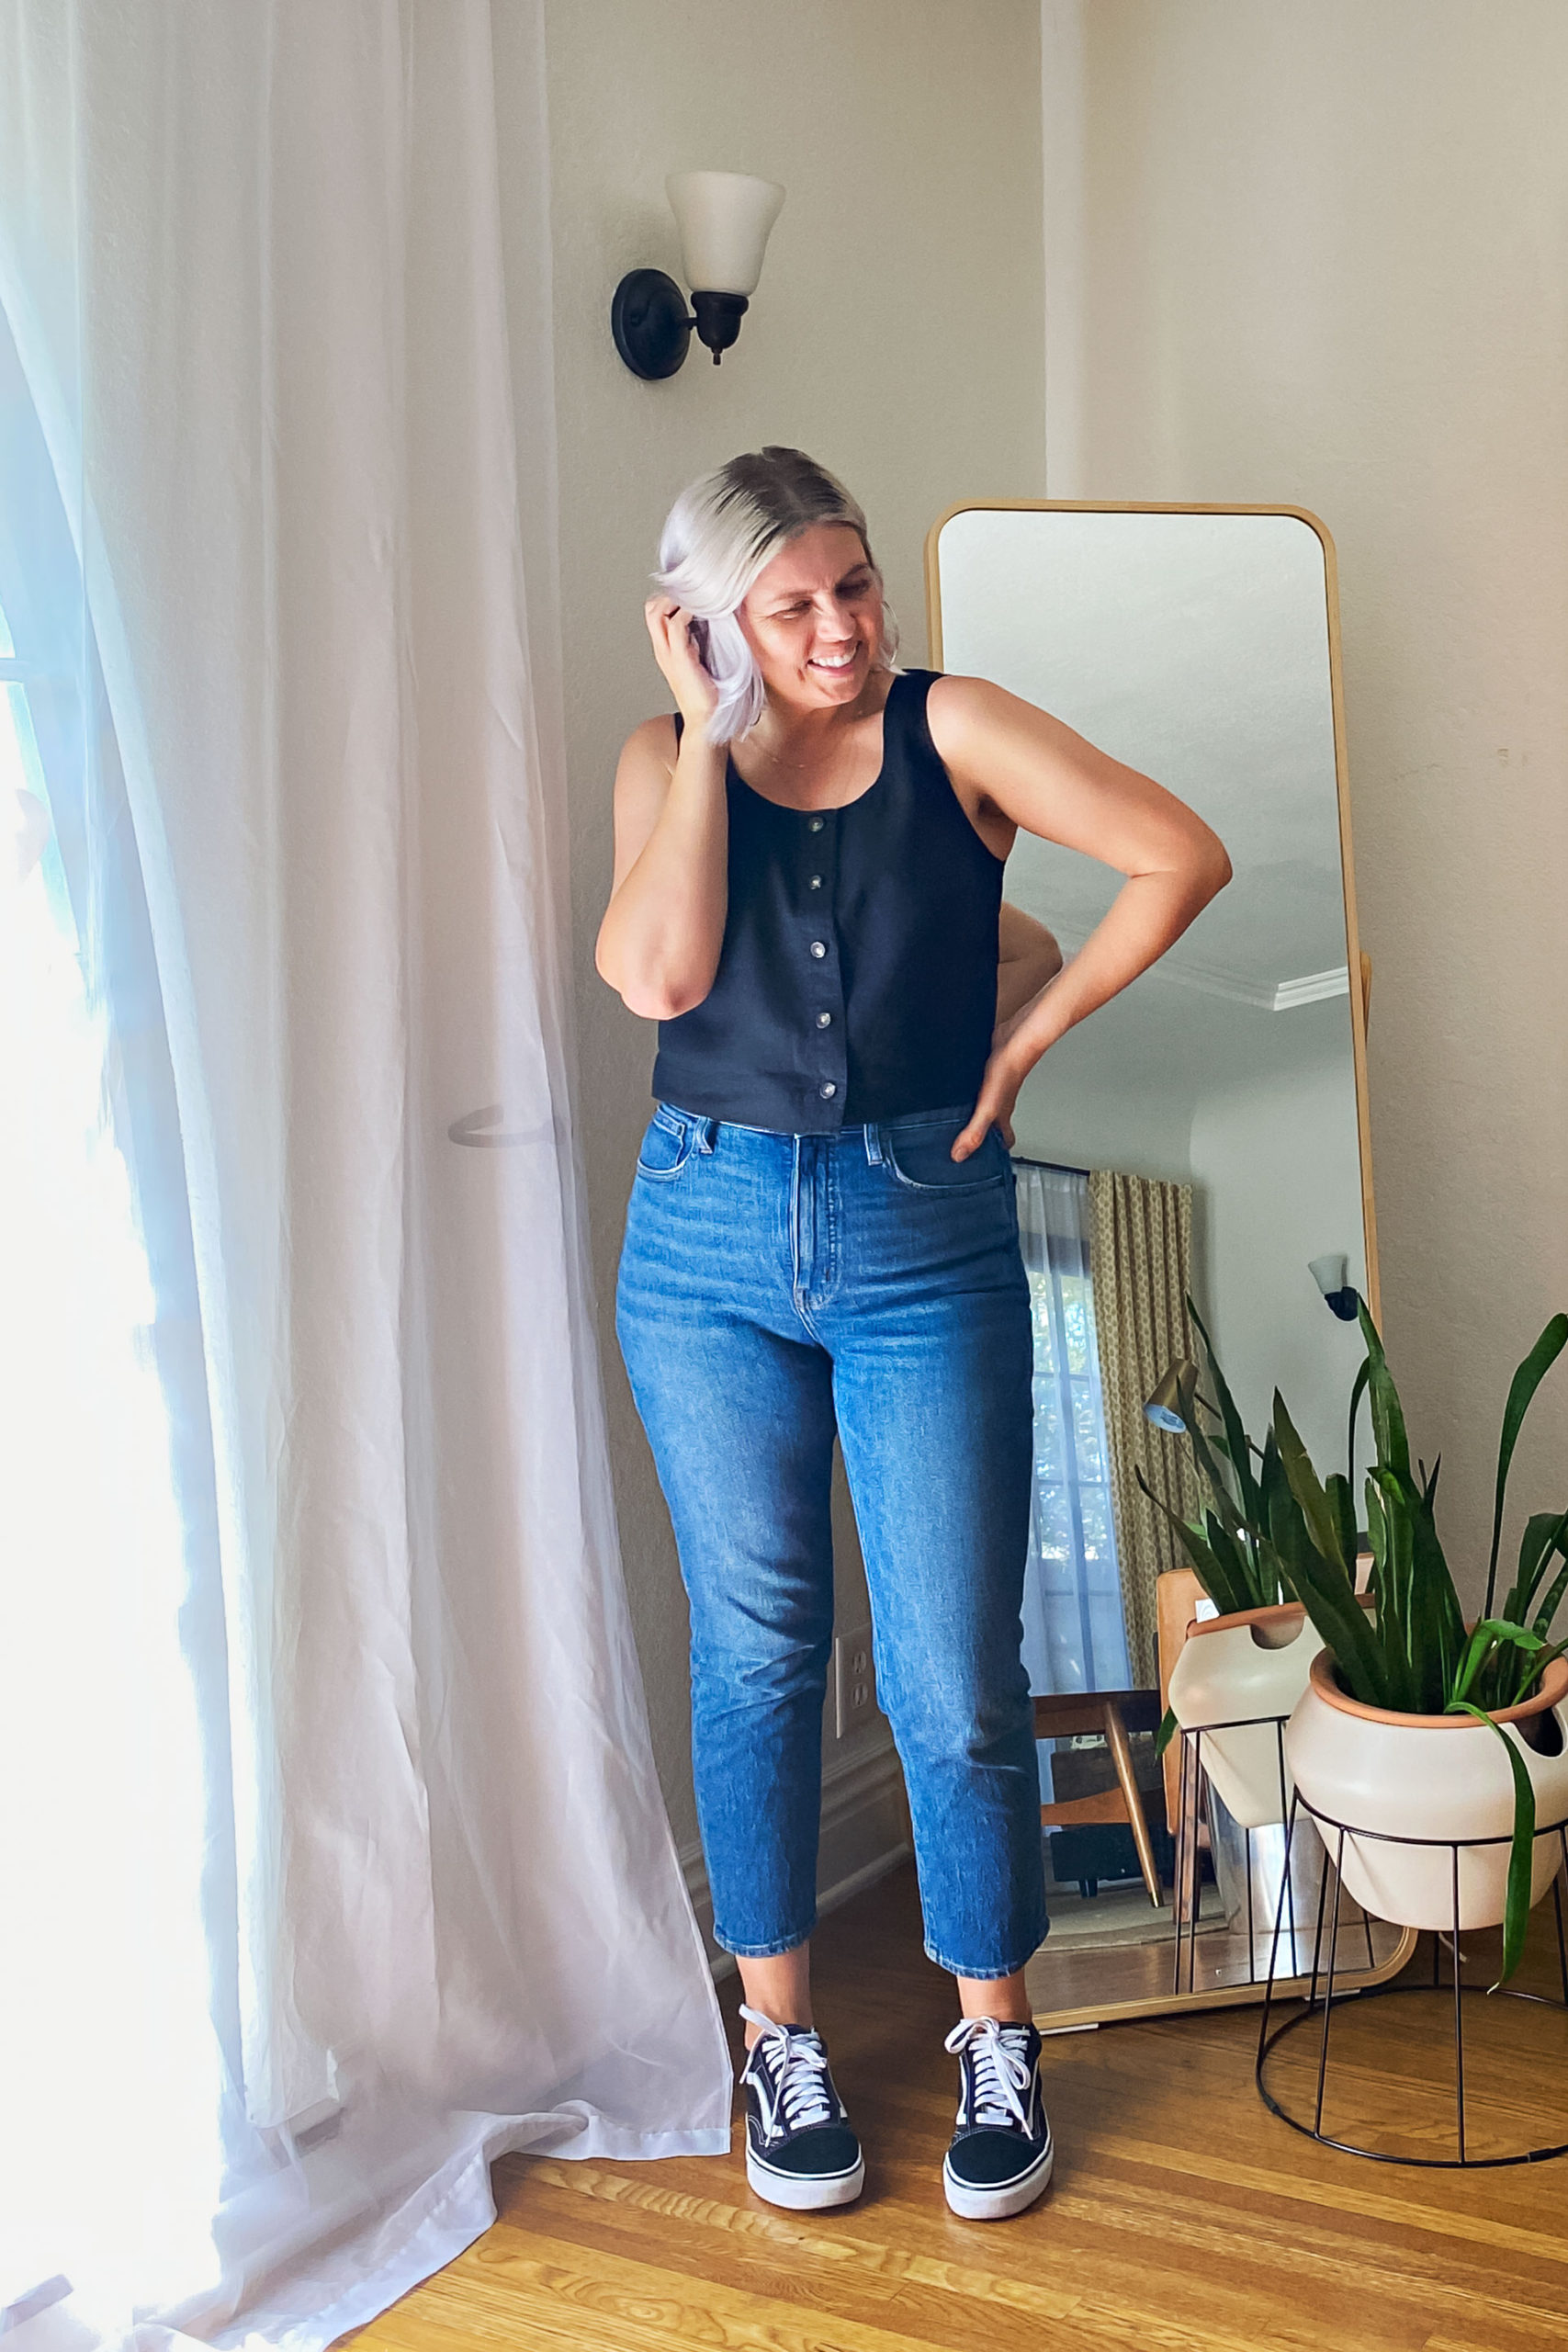 Black Linen Tank - THIS MOM'S GONNA SNAP!